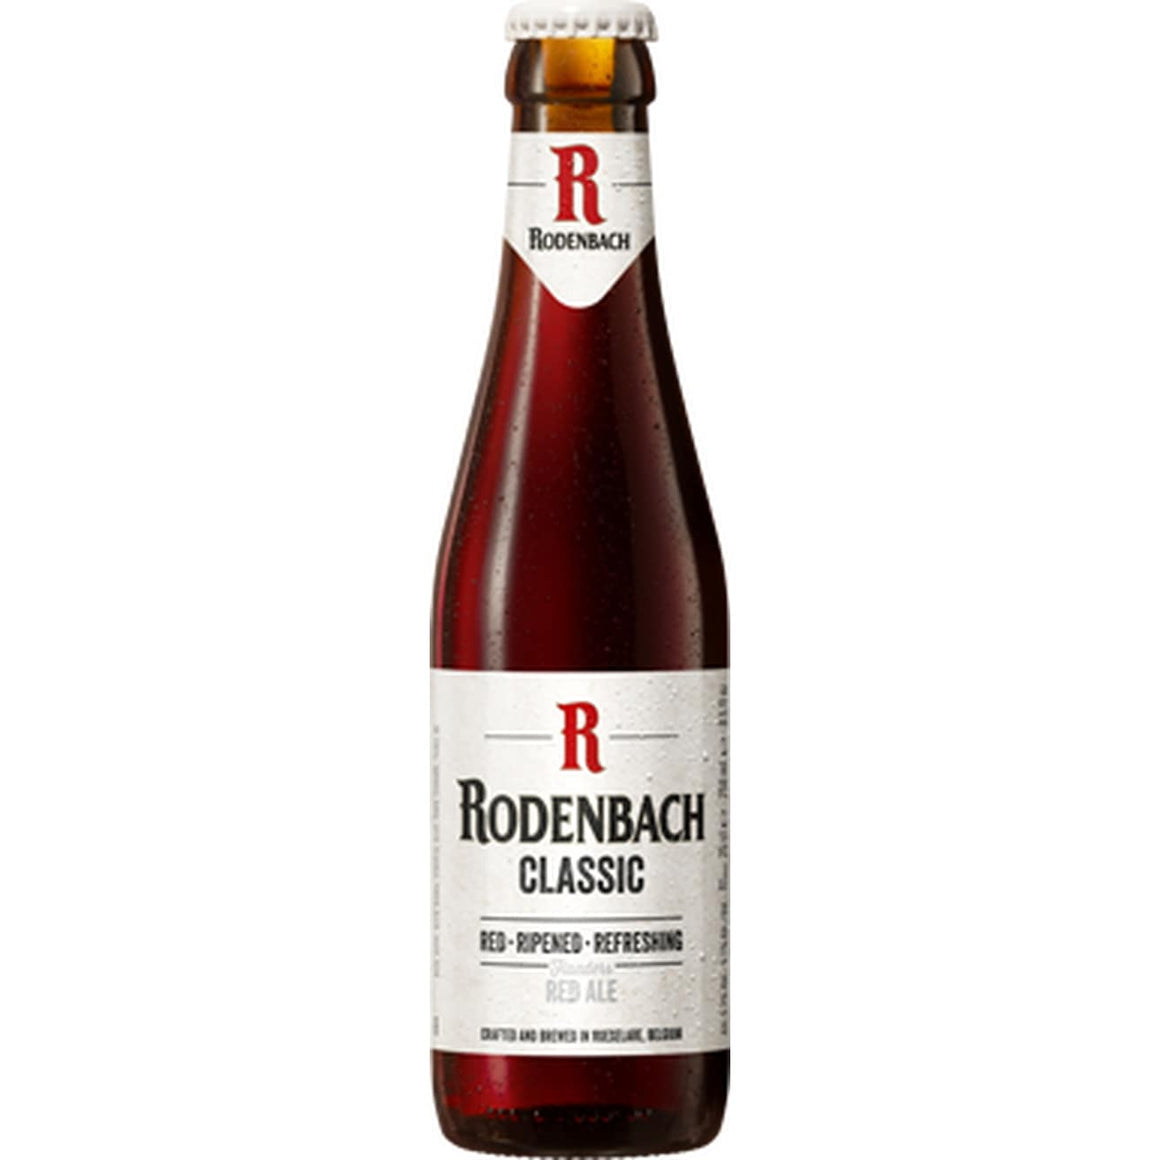 Rodenbach Classic Flanders Red Ale  5.2%